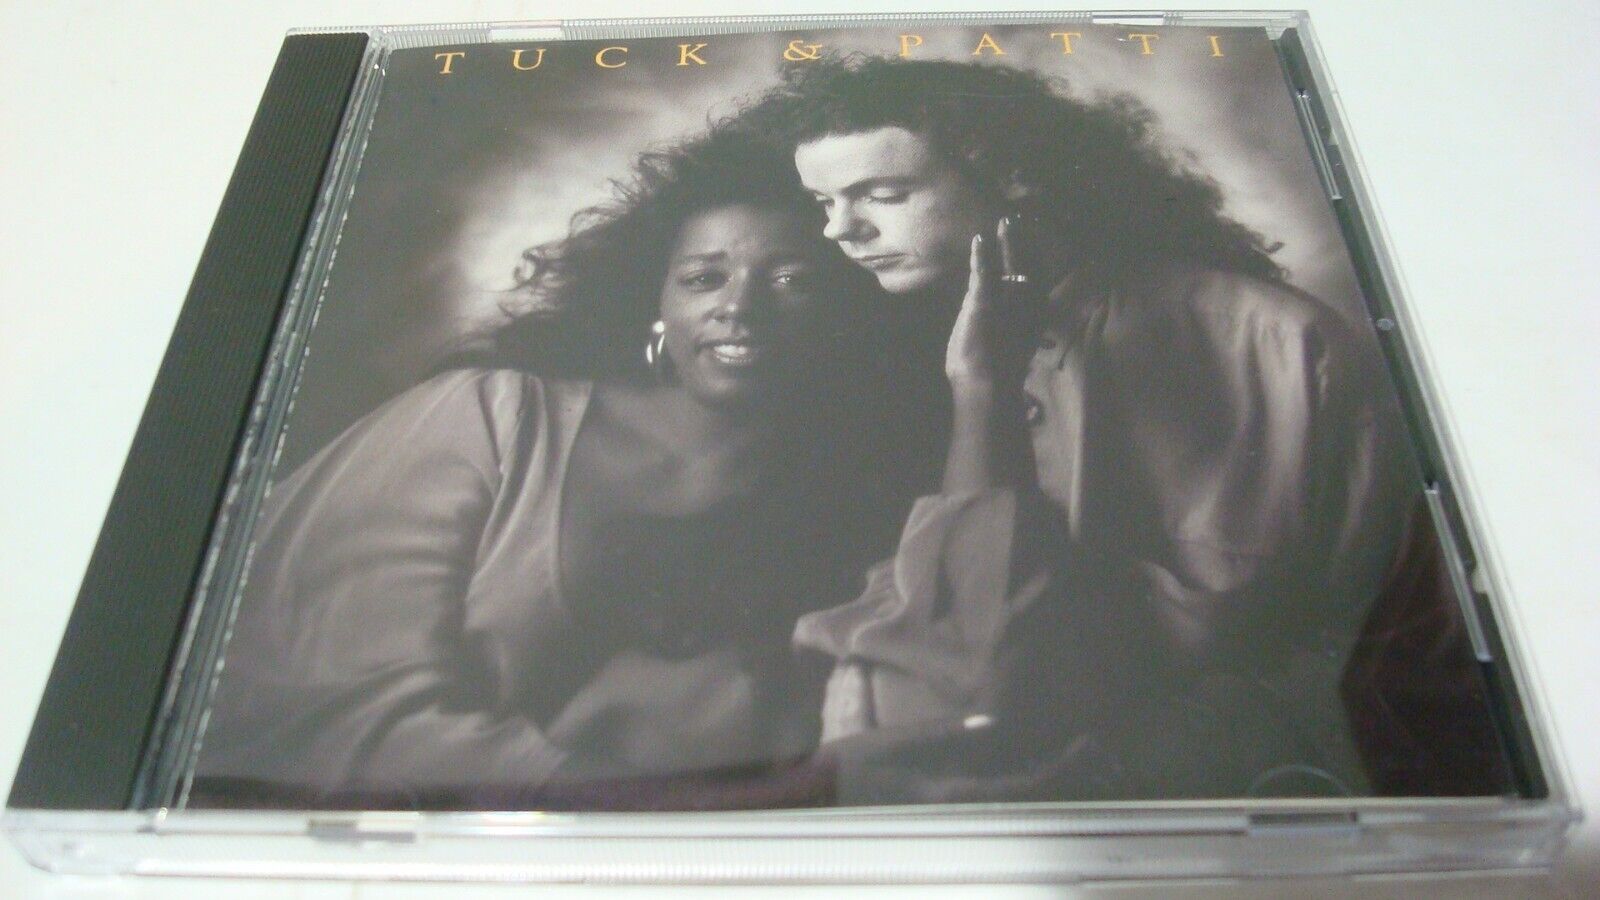 "Love Warriors" by Tuck & Patti (CD 1994 REISSUE Windham Hill WD-0116) Soul Jazz